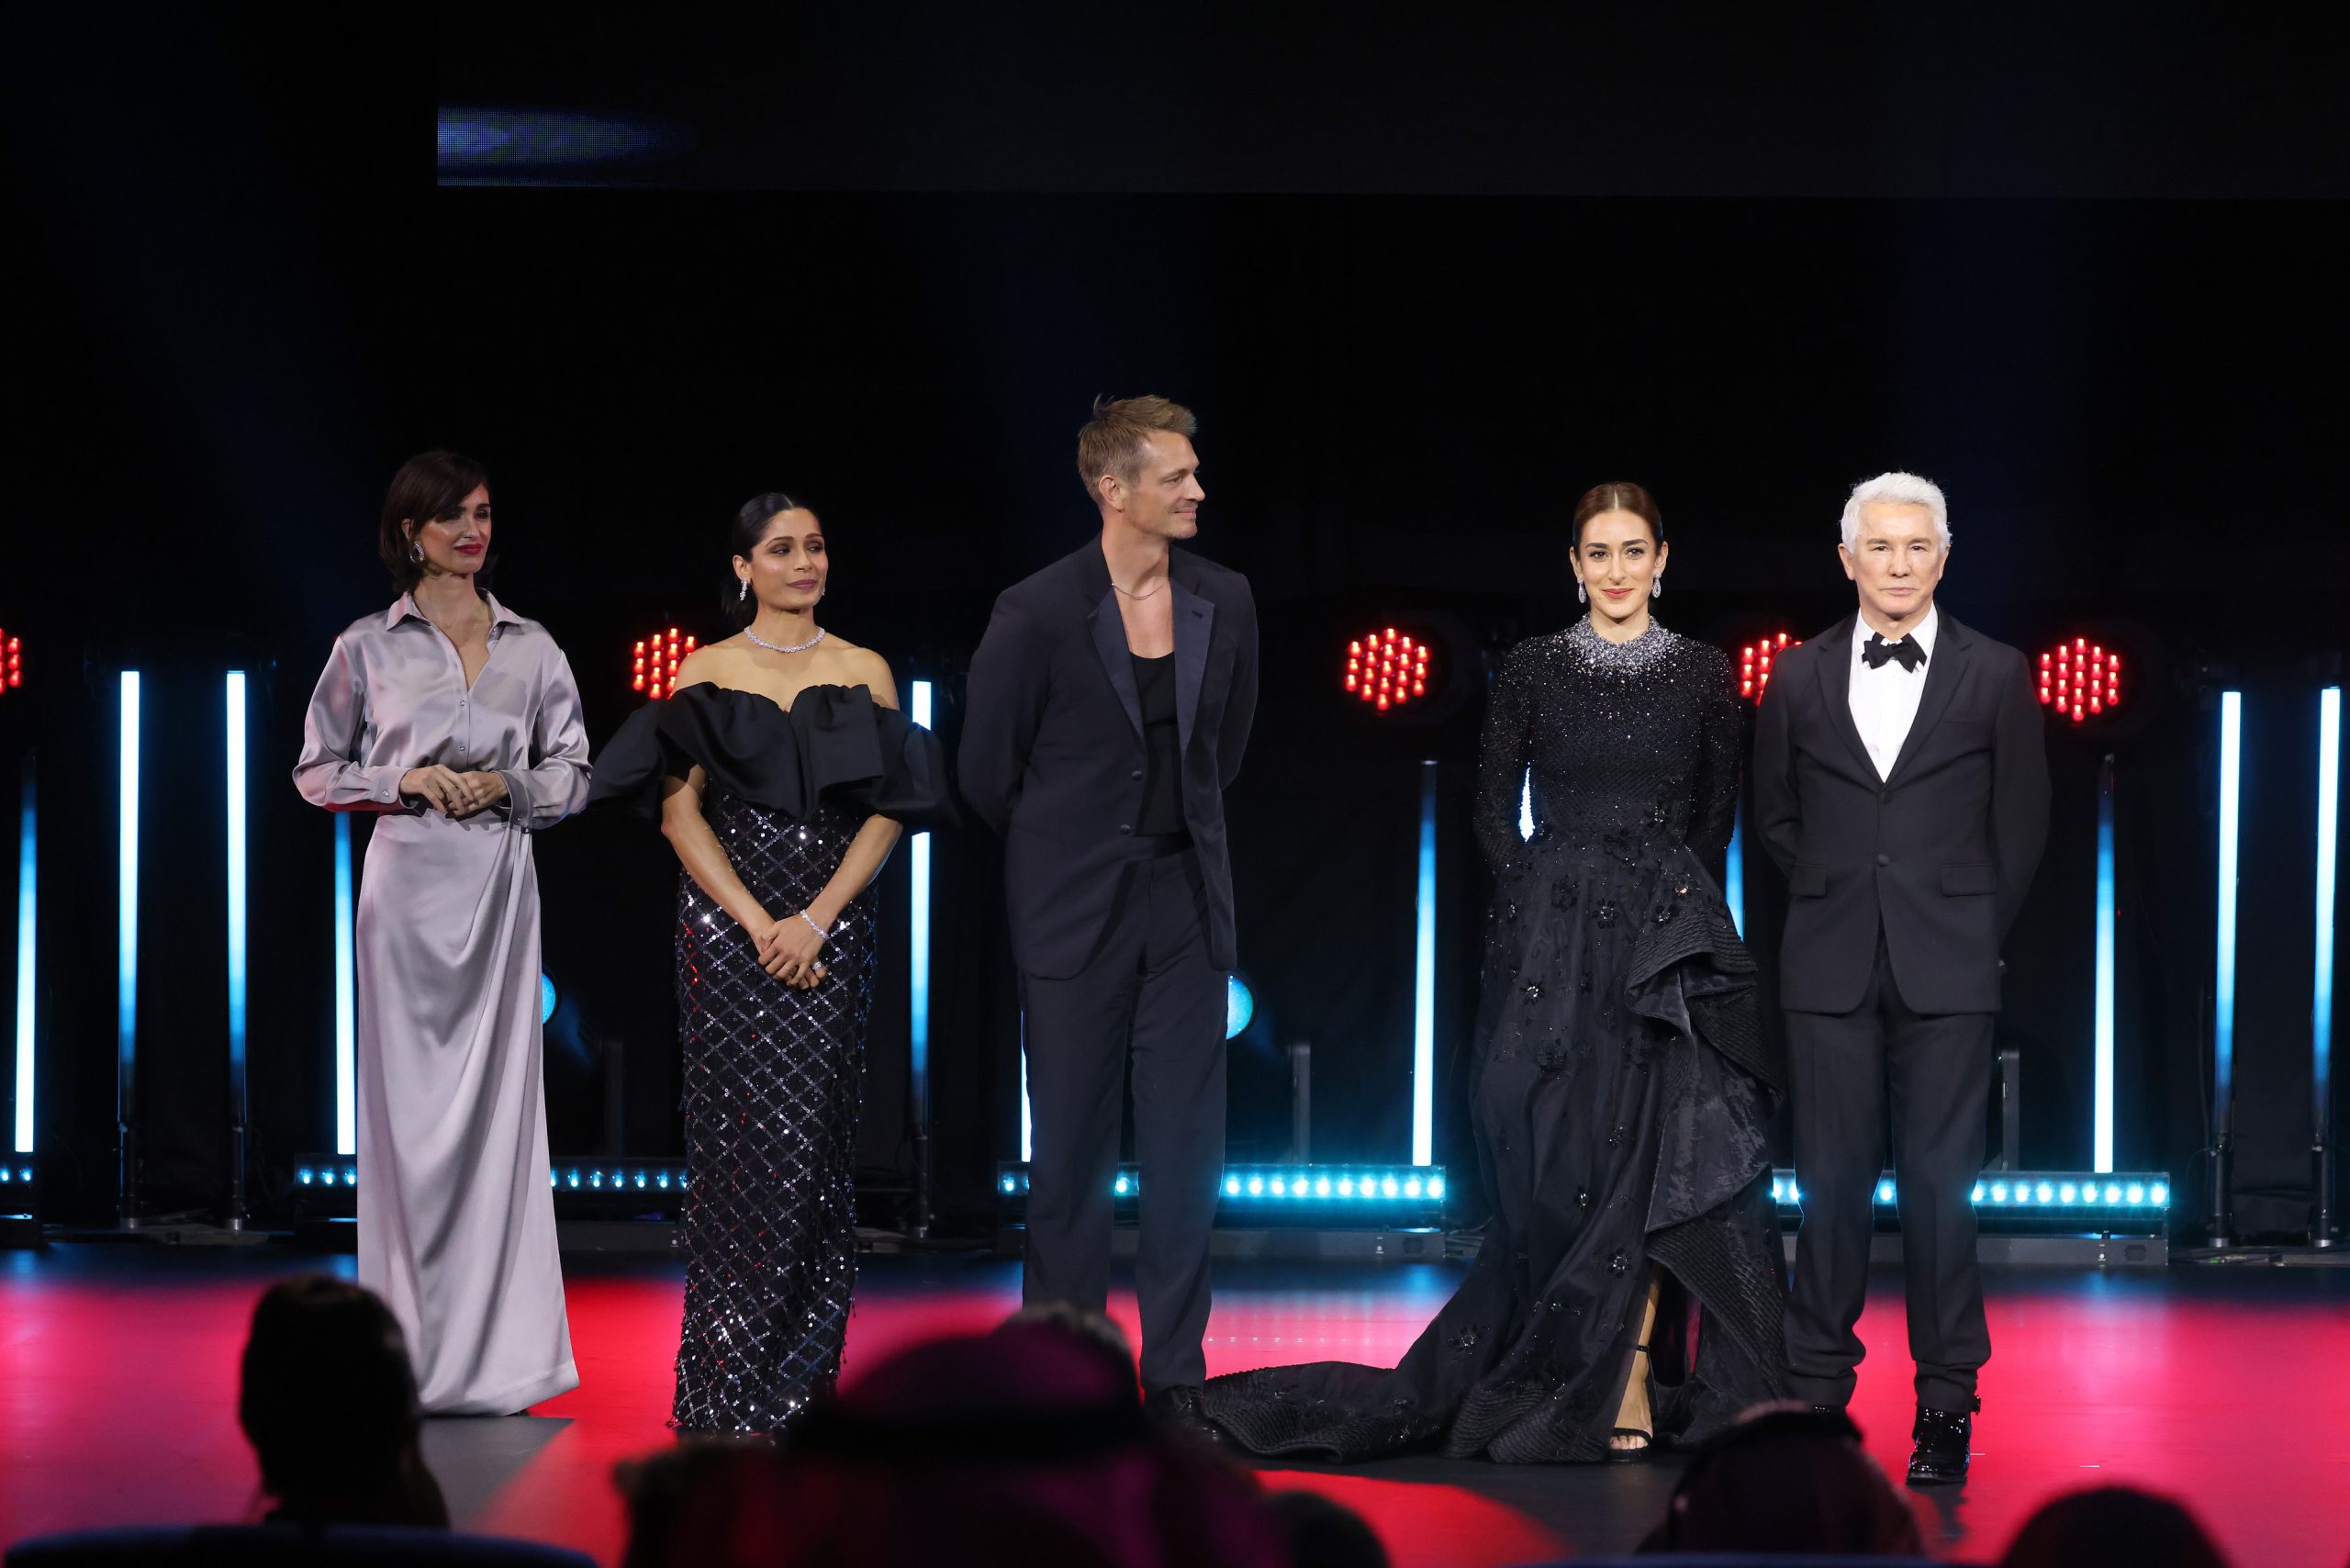 JEDDAH, SAUDI ARABIA - NOVEMBER 30: (L-R) Jury Member, Paz Vega, Jury Member, Freida Pinto, Jury Member, Joel Kinnaman, Jury Member, Amina Khalil and Jury President, Baz Luhrmann on stage during the Opening Ceremony at the Red Sea International Film Festival 2023 on November 30, 2023 in Jeddah, Saudi Arabia. (Photo by Tim P. Whitby/Getty Images for The Red Sea International Film Festival)